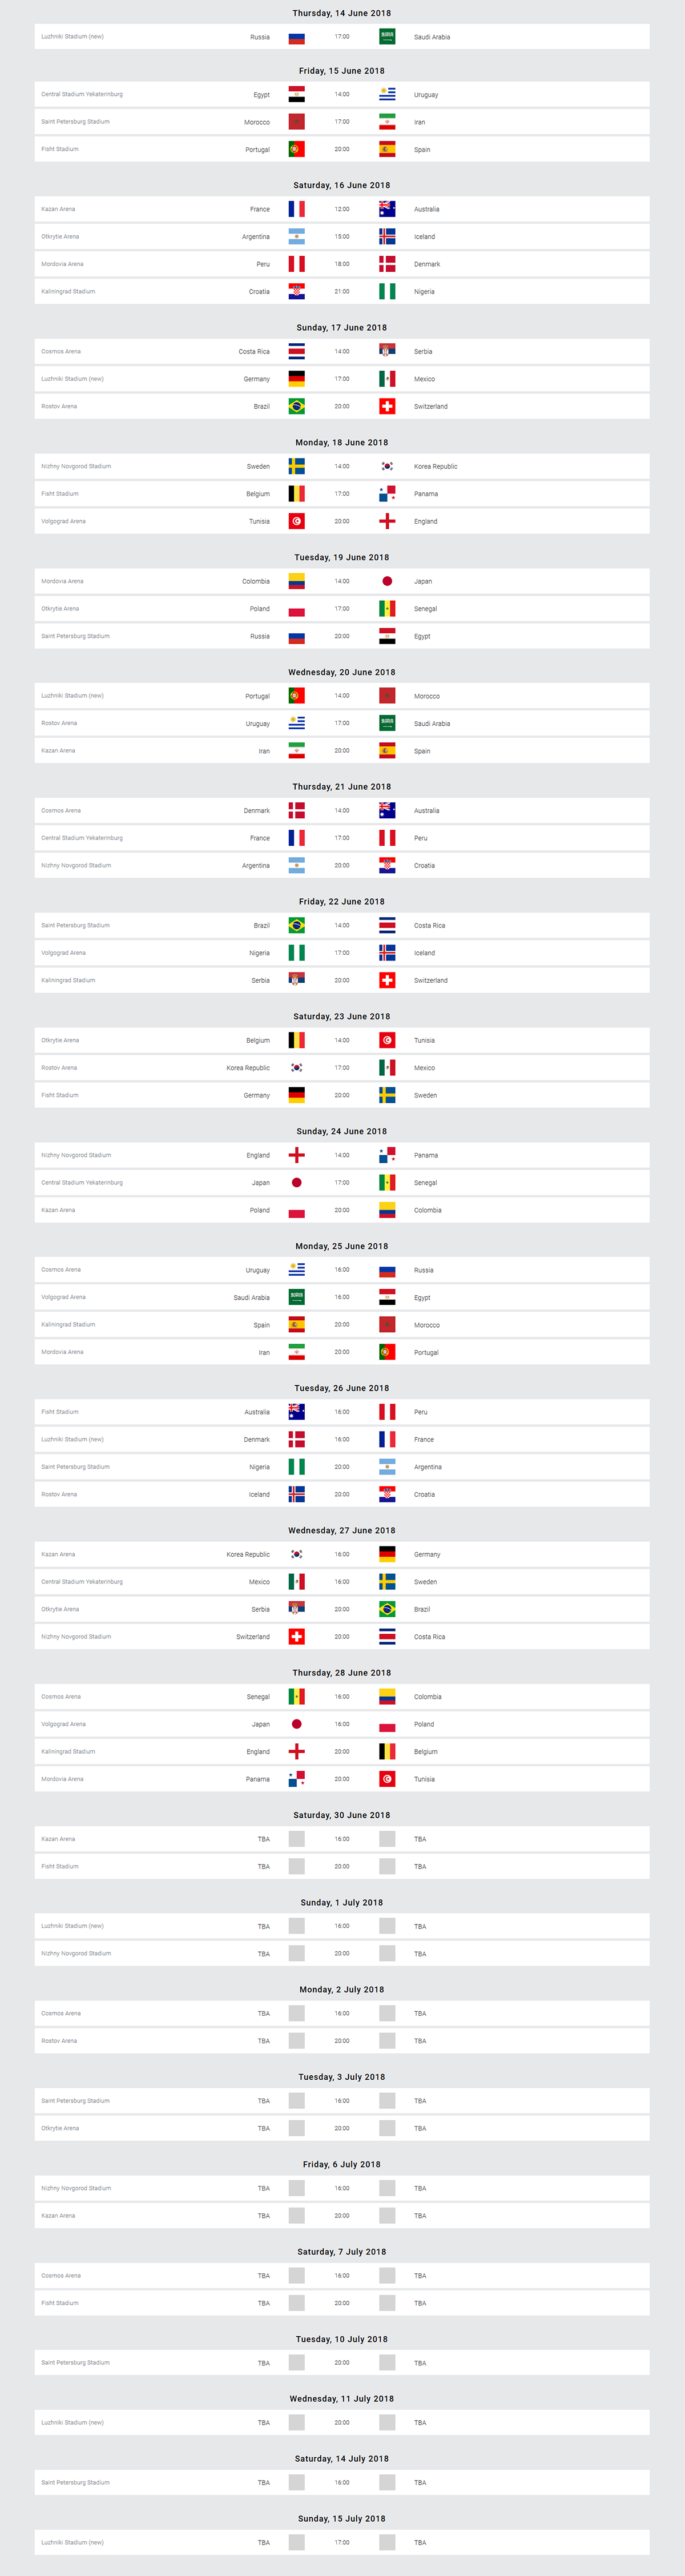 2018 FIFA World Cup Schedule